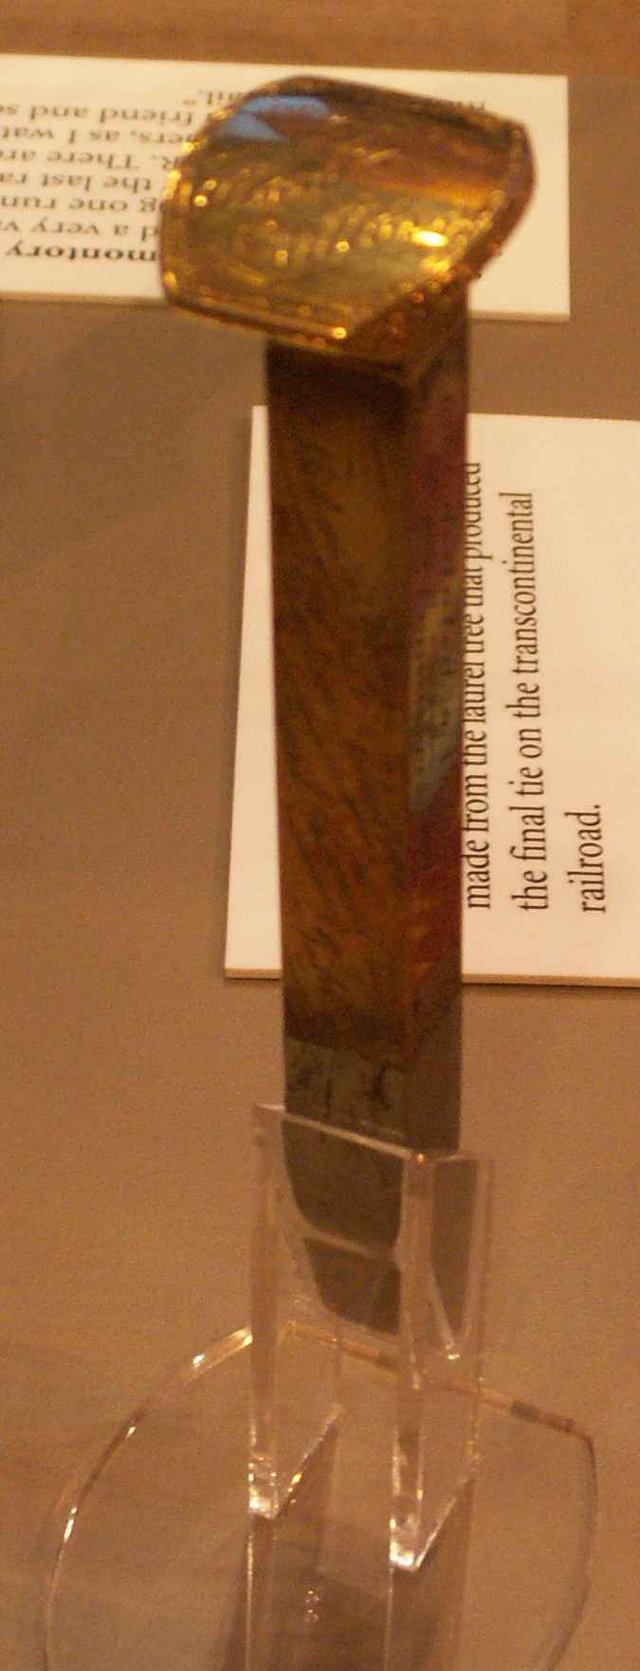 Golden spike, one of four ceremonial spikes driven at the completion